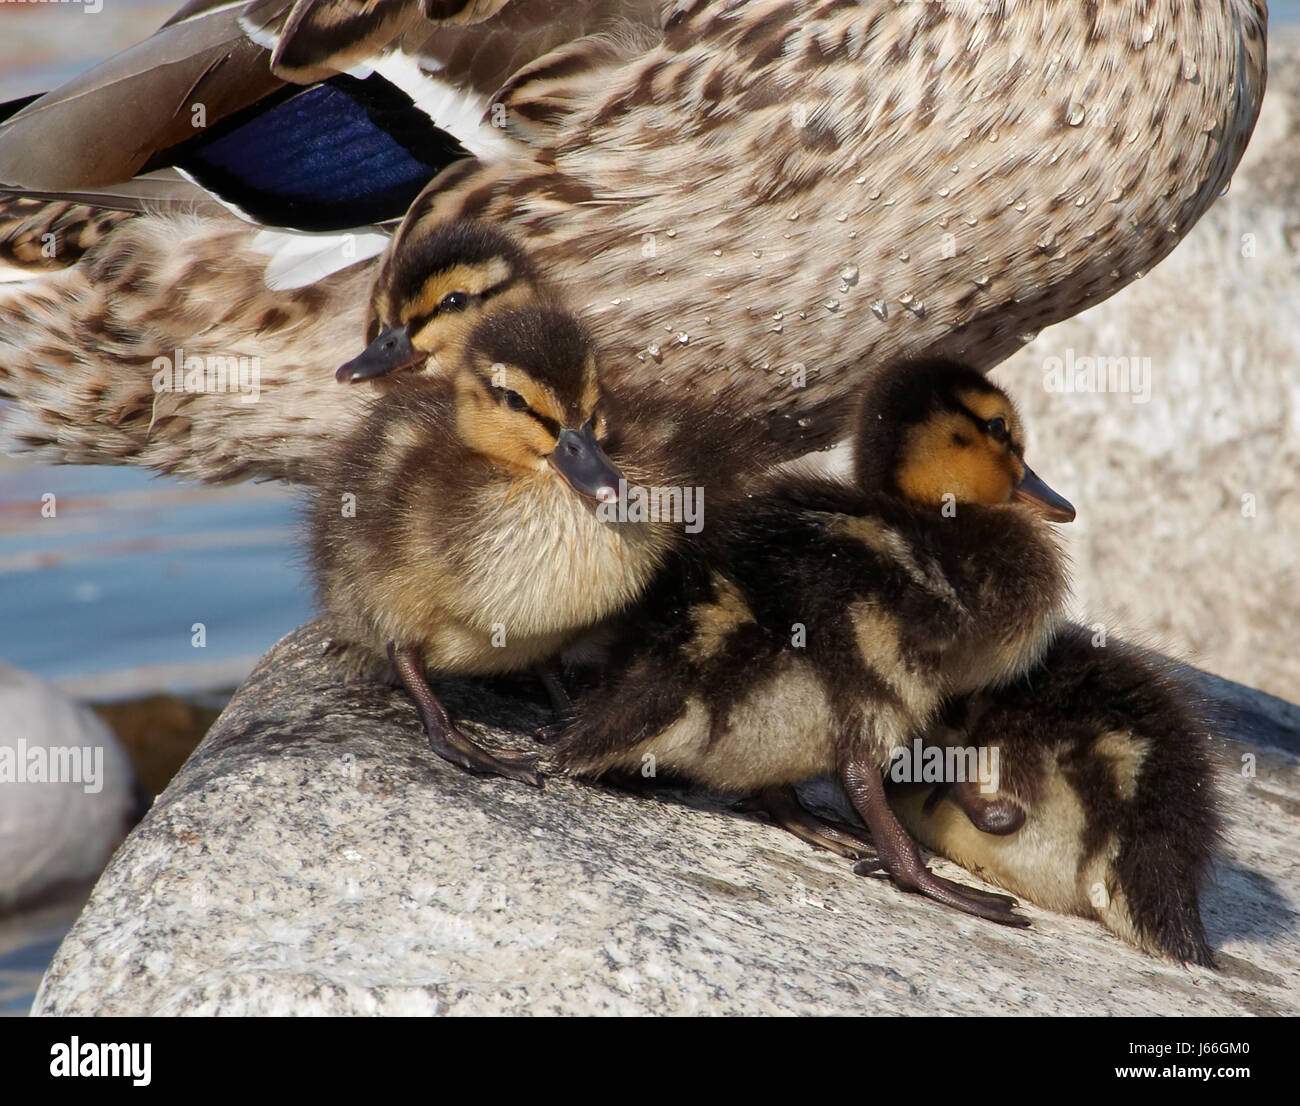 duck duckling adorable puppies young younger whelps pupies detail animal bird Stock Photo